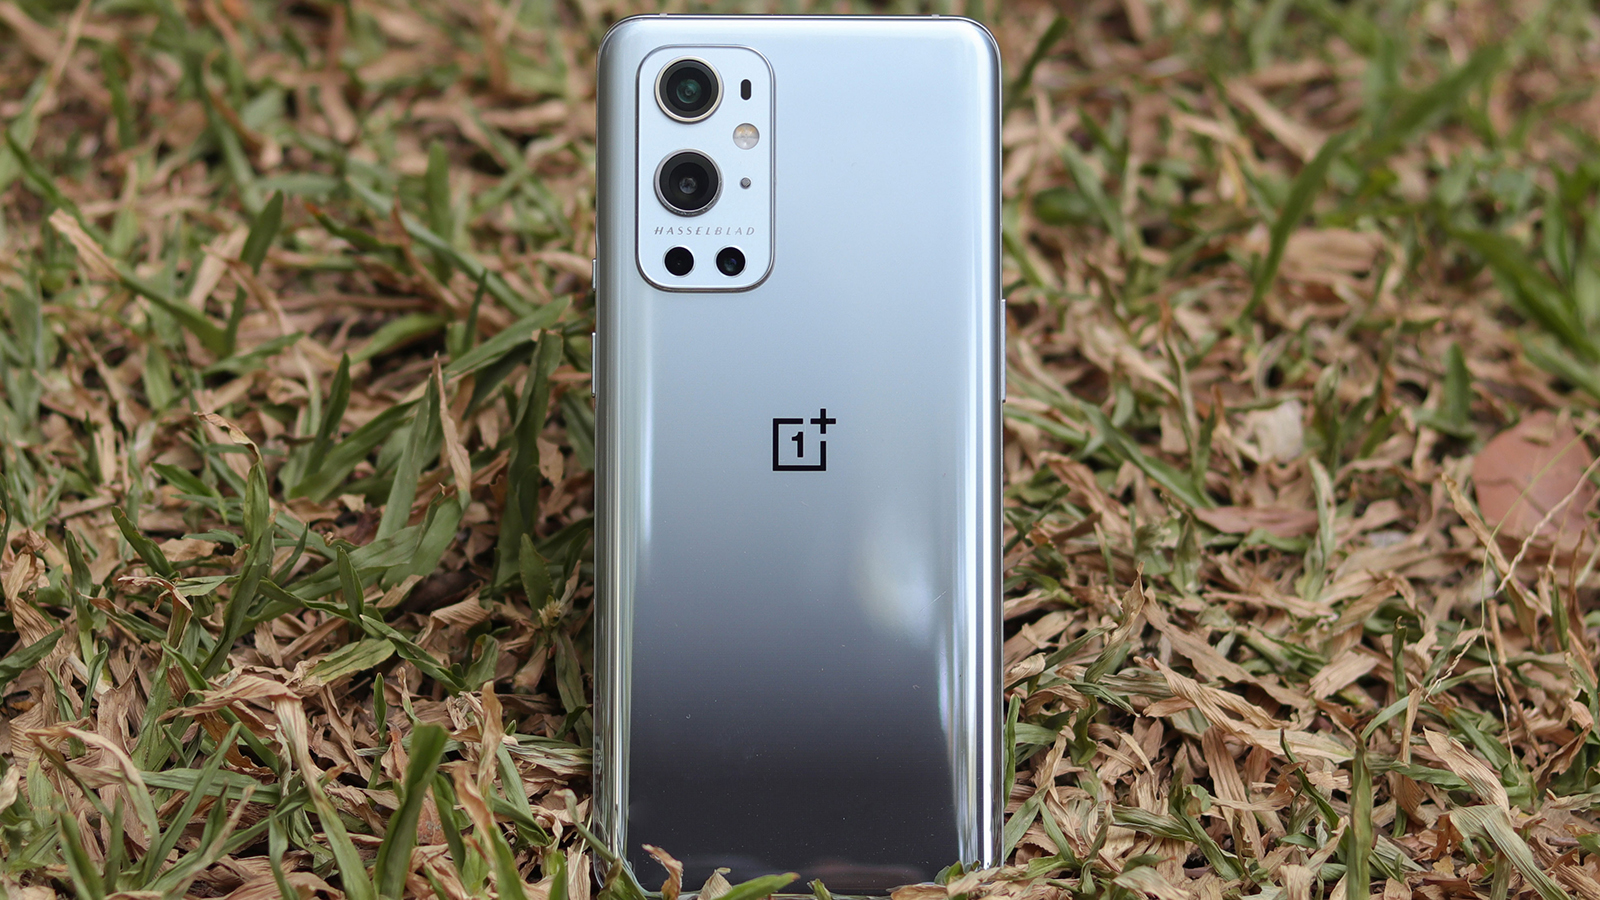 OnePlus 10 Skilled leak reveals all of the phone’s key specs